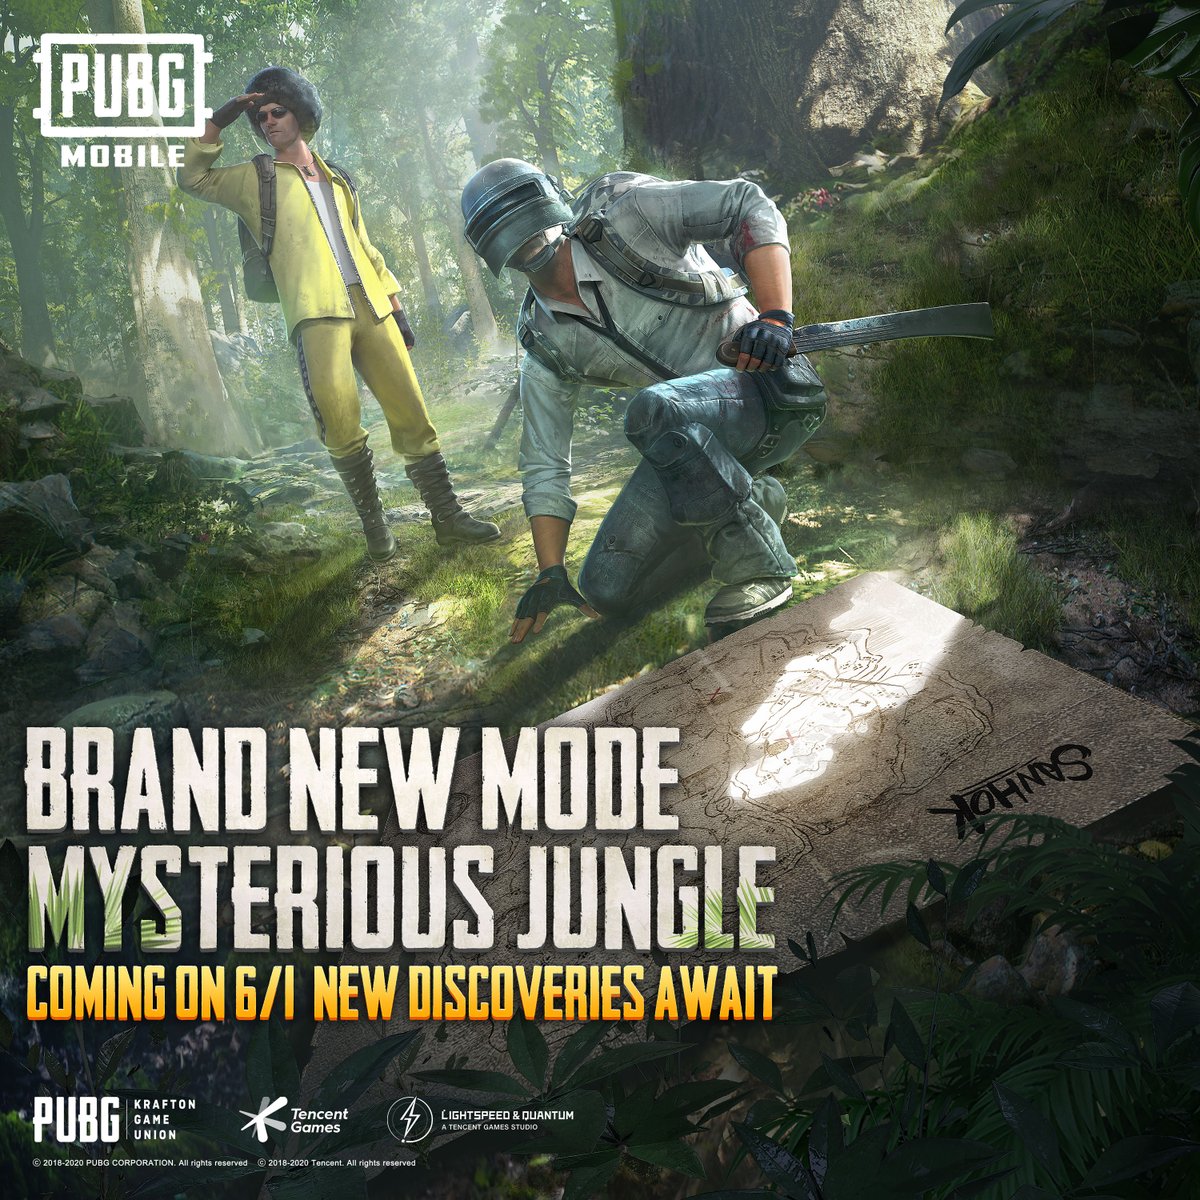 Pubg Mobile Adventure Awaits Make Sure You Re Prepared To Enter The Mysterious Jungle On 6 1 T Co Bx8fzowap8